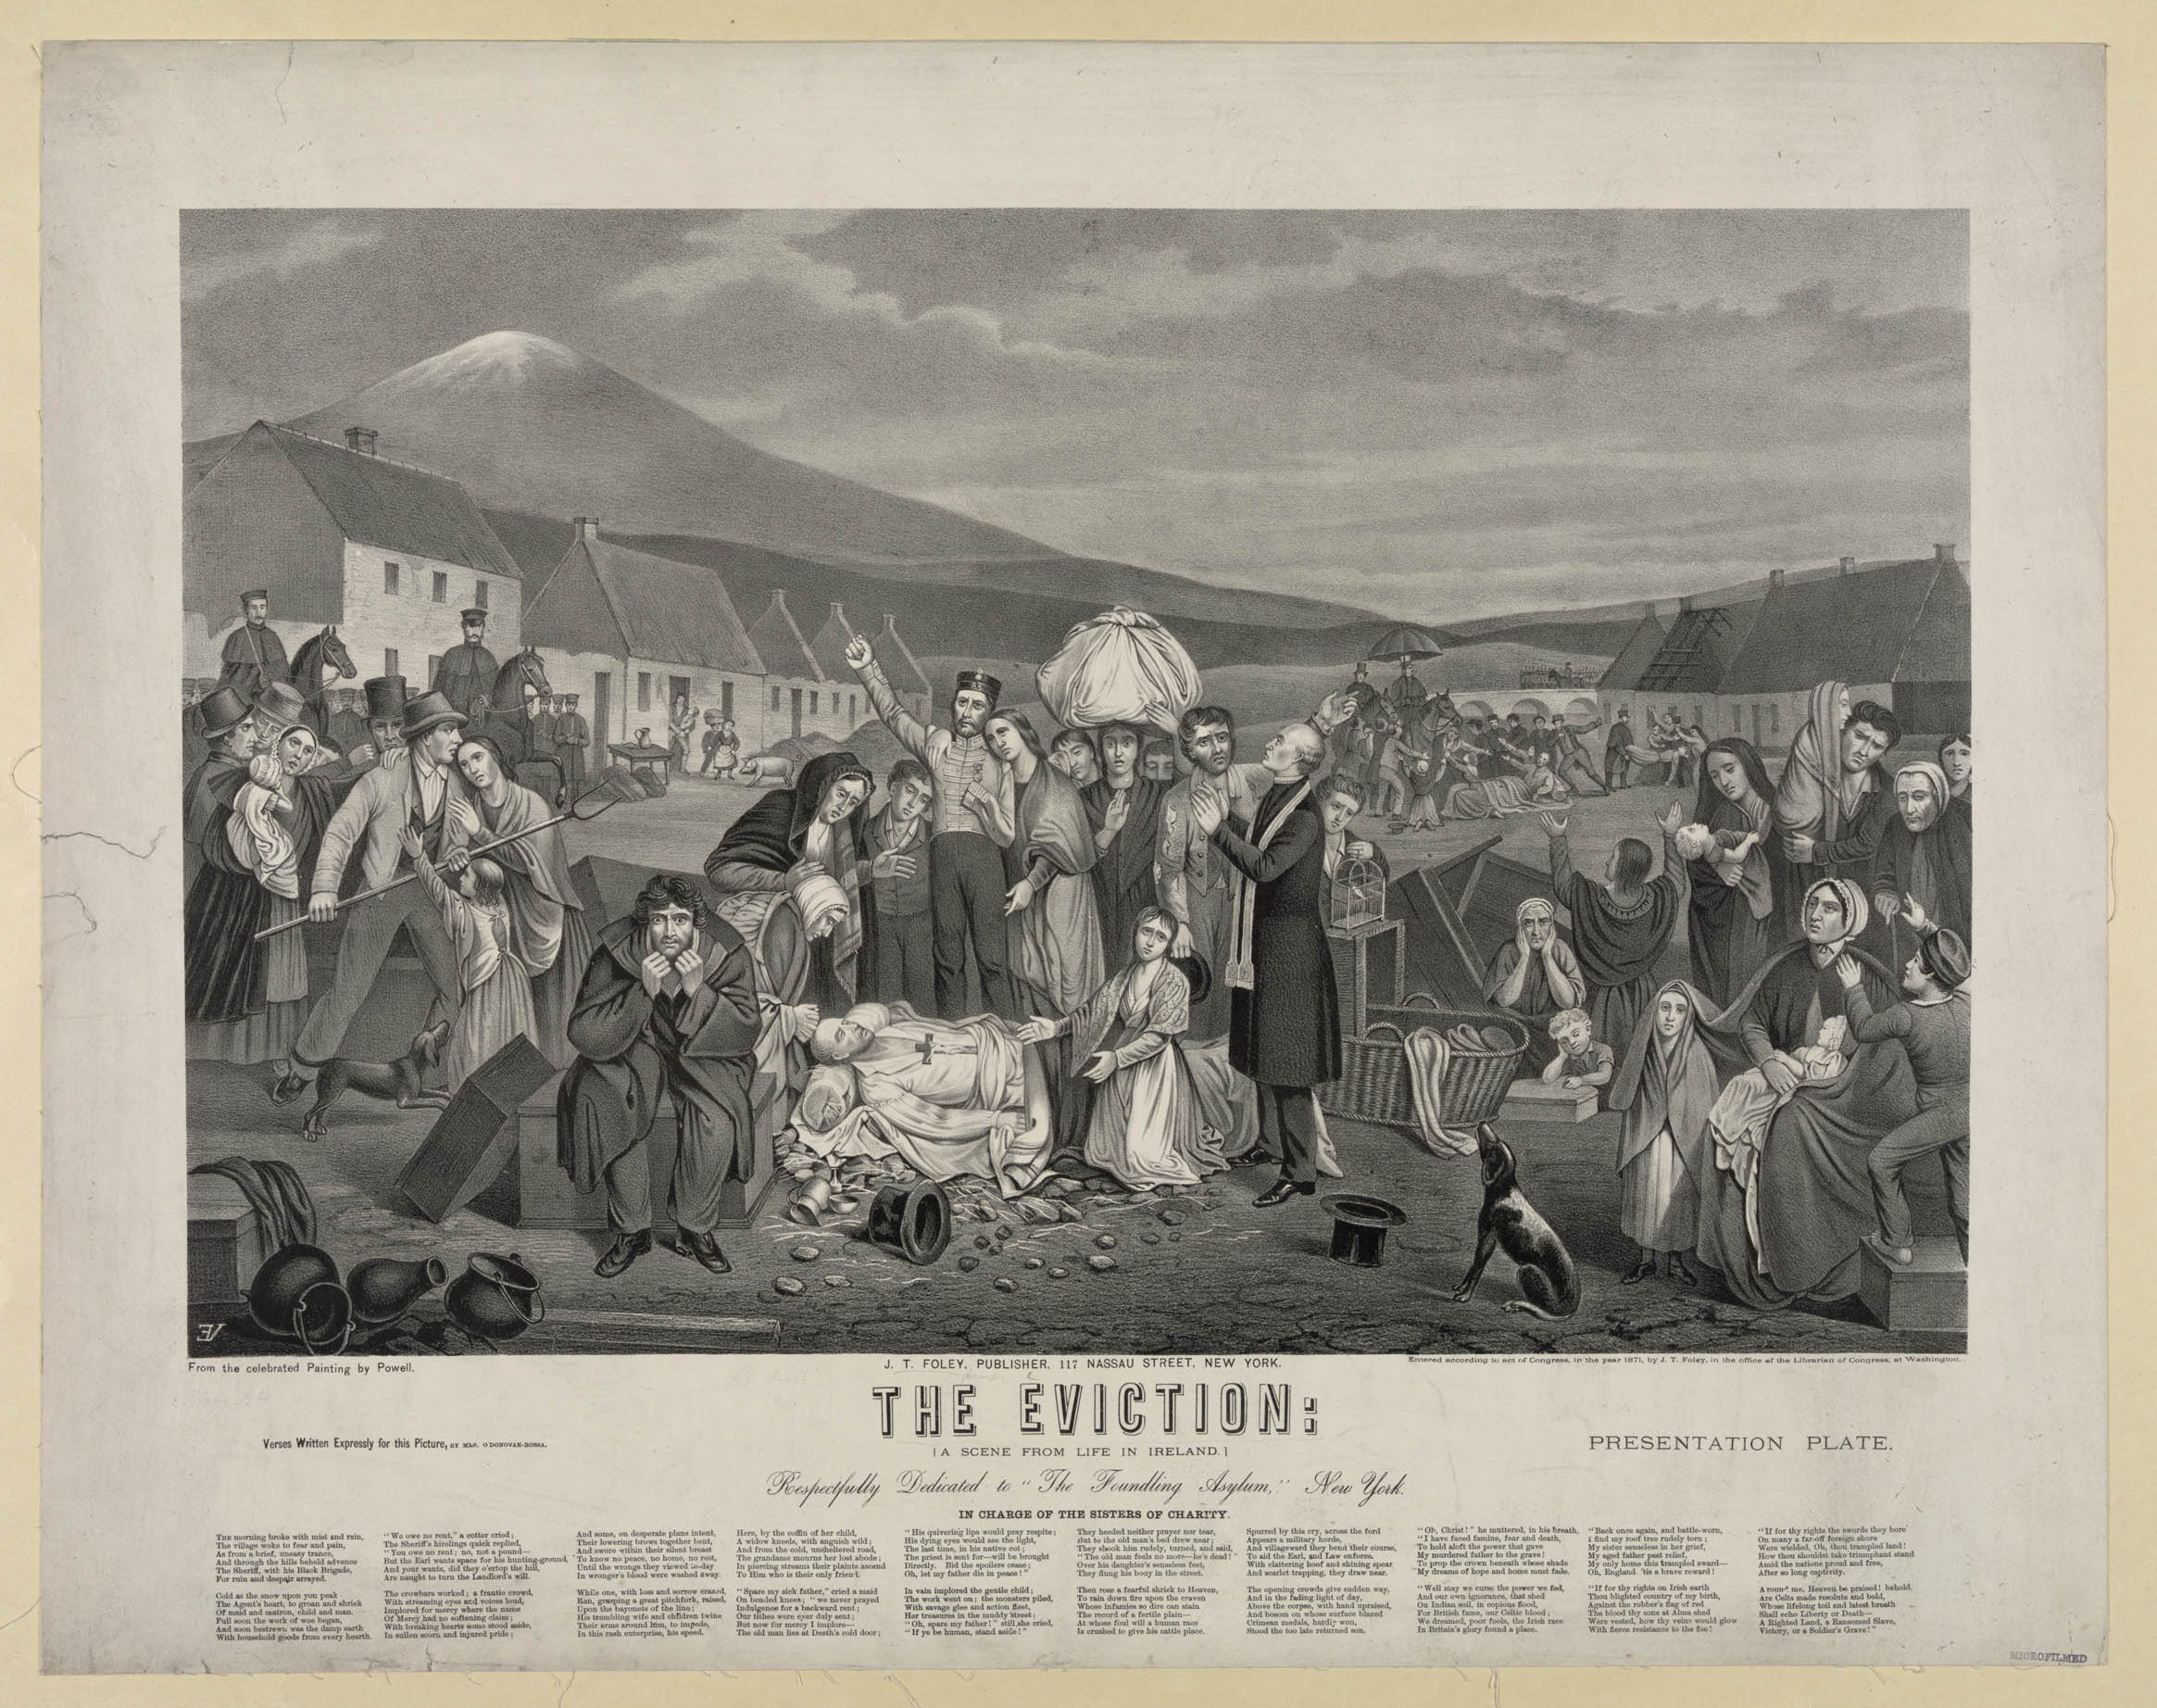 “The Eviction: A Scene from Life in Ireland,” an 1871 Library of Congress presentation plate published by J.T. Foley after a painting by W.H. Powel. The scene shows clusters of tenants with their belongings after being forcibly evicted from their homes on land largely owned by British absentee landlords. The text at the bottom is an original poem commissioned for the plate by Mary Jane O’Donovan-Rossa. (Photo: Library of Congress)